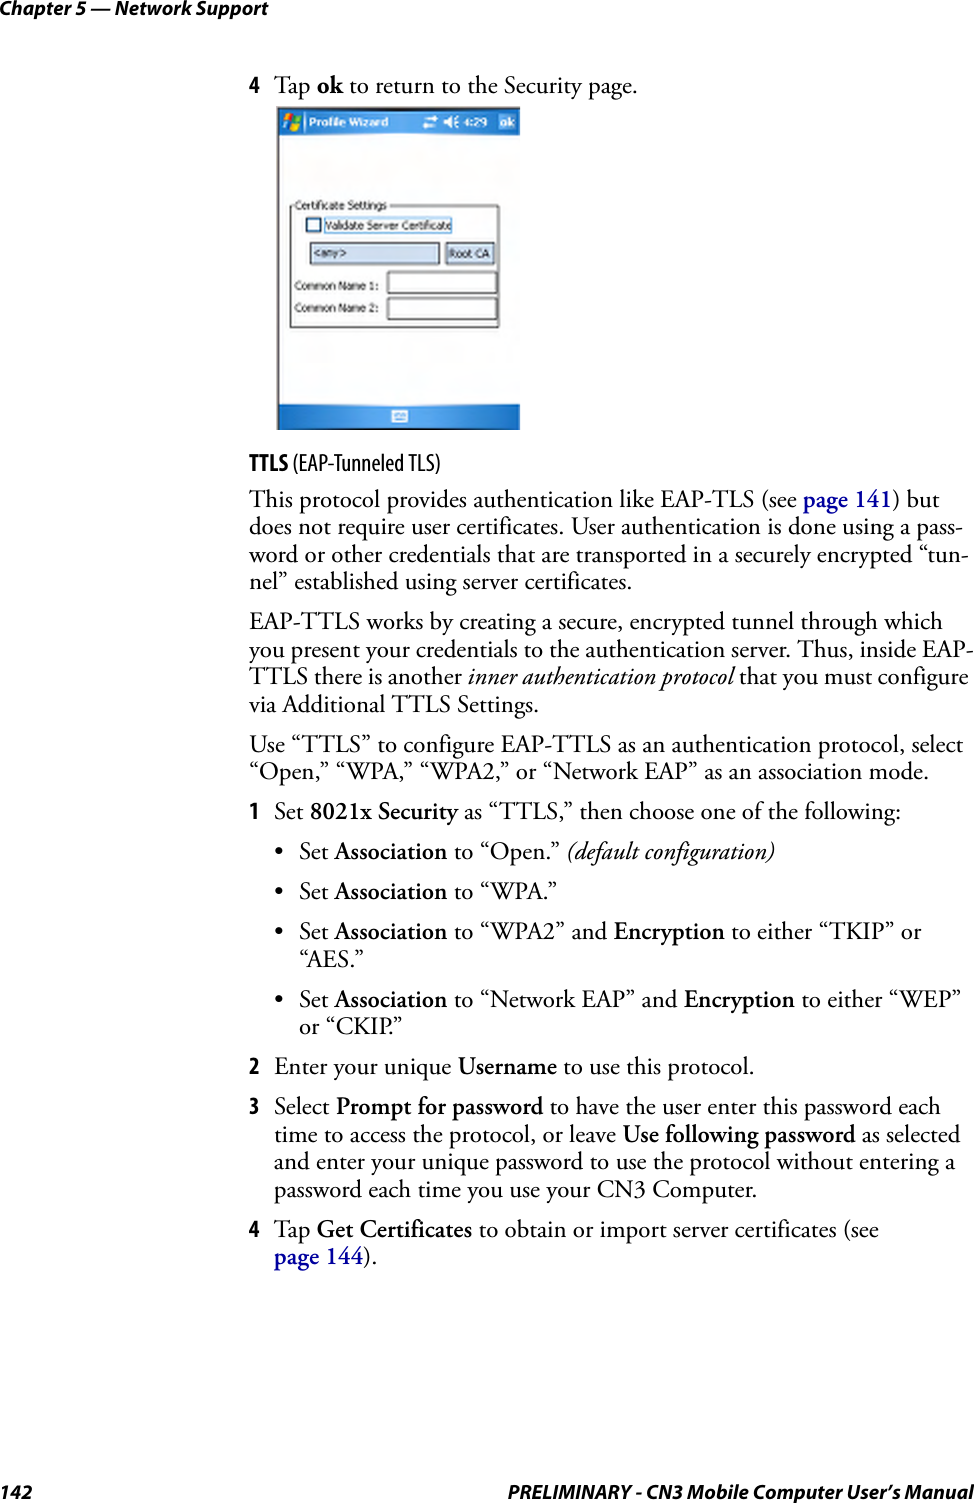 Chapter 5 — Network Support142 PRELIMINARY - CN3 Mobile Computer User’s Manual4Tap  ok to return to the Security page.TTLS (EAP-Tunneled TLS)This protocol provides authentication like EAP-TLS (see page 141) but does not require user certificates. User authentication is done using a pass-word or other credentials that are transported in a securely encrypted “tun-nel” established using server certificates.EAP-TTLS works by creating a secure, encrypted tunnel through which you present your credentials to the authentication server. Thus, inside EAP-TTLS there is another inner authentication protocol that you must configure via Additional TTLS Settings.Use “TTLS” to configure EAP-TTLS as an authentication protocol, select “Open,” “WPA,” “WPA2,” or “Network EAP” as an association mode.1Set 8021x Security as “TTLS,” then choose one of the following:•Set Association to “Open.” (default configuration)•Set Association to “WPA.”•Set Association to “WPA2” and Encryption to either “TKIP” or “AES.”•Set Association to “Network EAP” and Encryption to either “WEP” or “CKIP.”2Enter your unique Username to use this protocol.3Select Prompt for password to have the user enter this password each time to access the protocol, or leave Use following password as selected and enter your unique password to use the protocol without entering a password each time you use your CN3 Computer.4Tap  Get Certificates to obtain or import server certificates (see page 144).